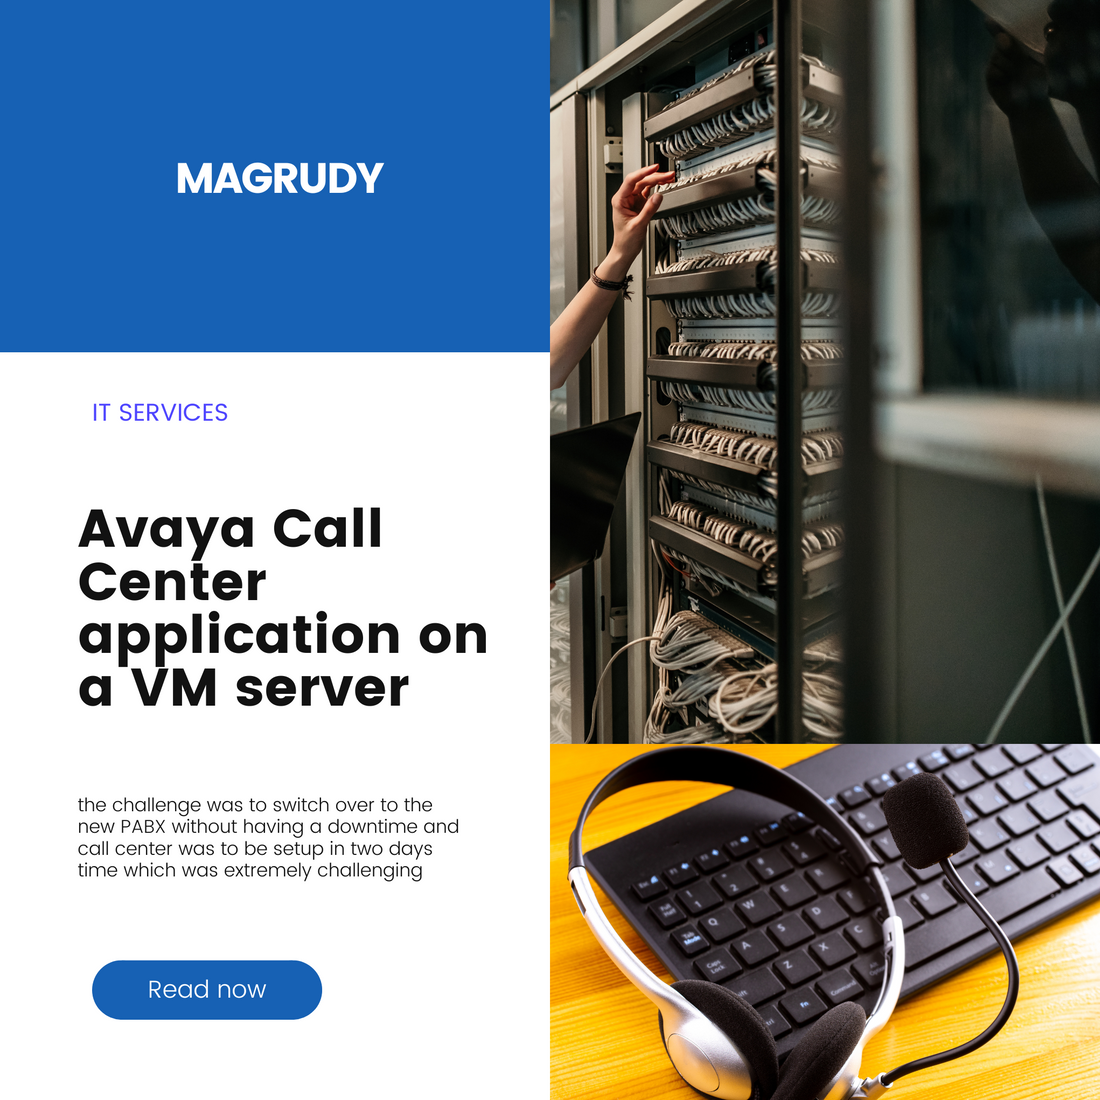 Magrudy - Implementing call center application on a VM server